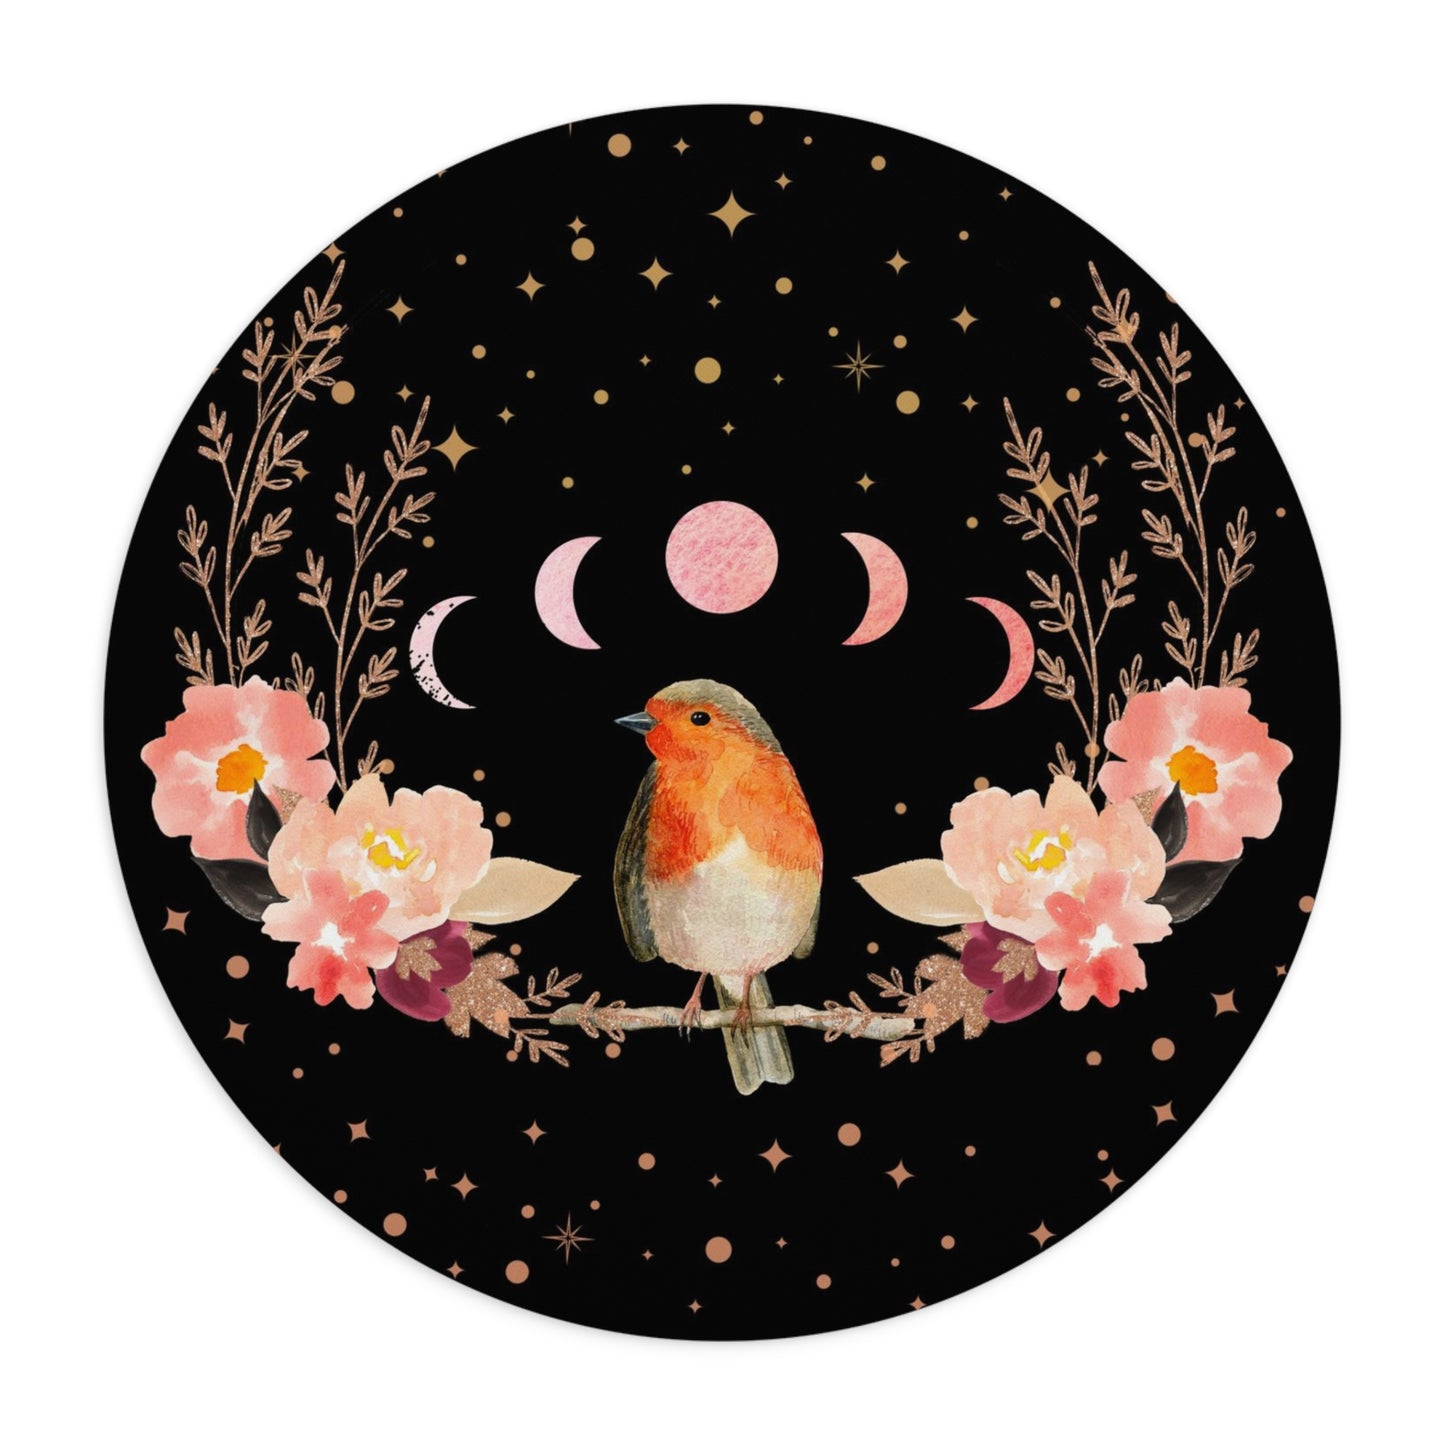 Orange Songbird Peach Flowers Mouse Pad (Round or Rectangle) Cute Floral Office Accessories